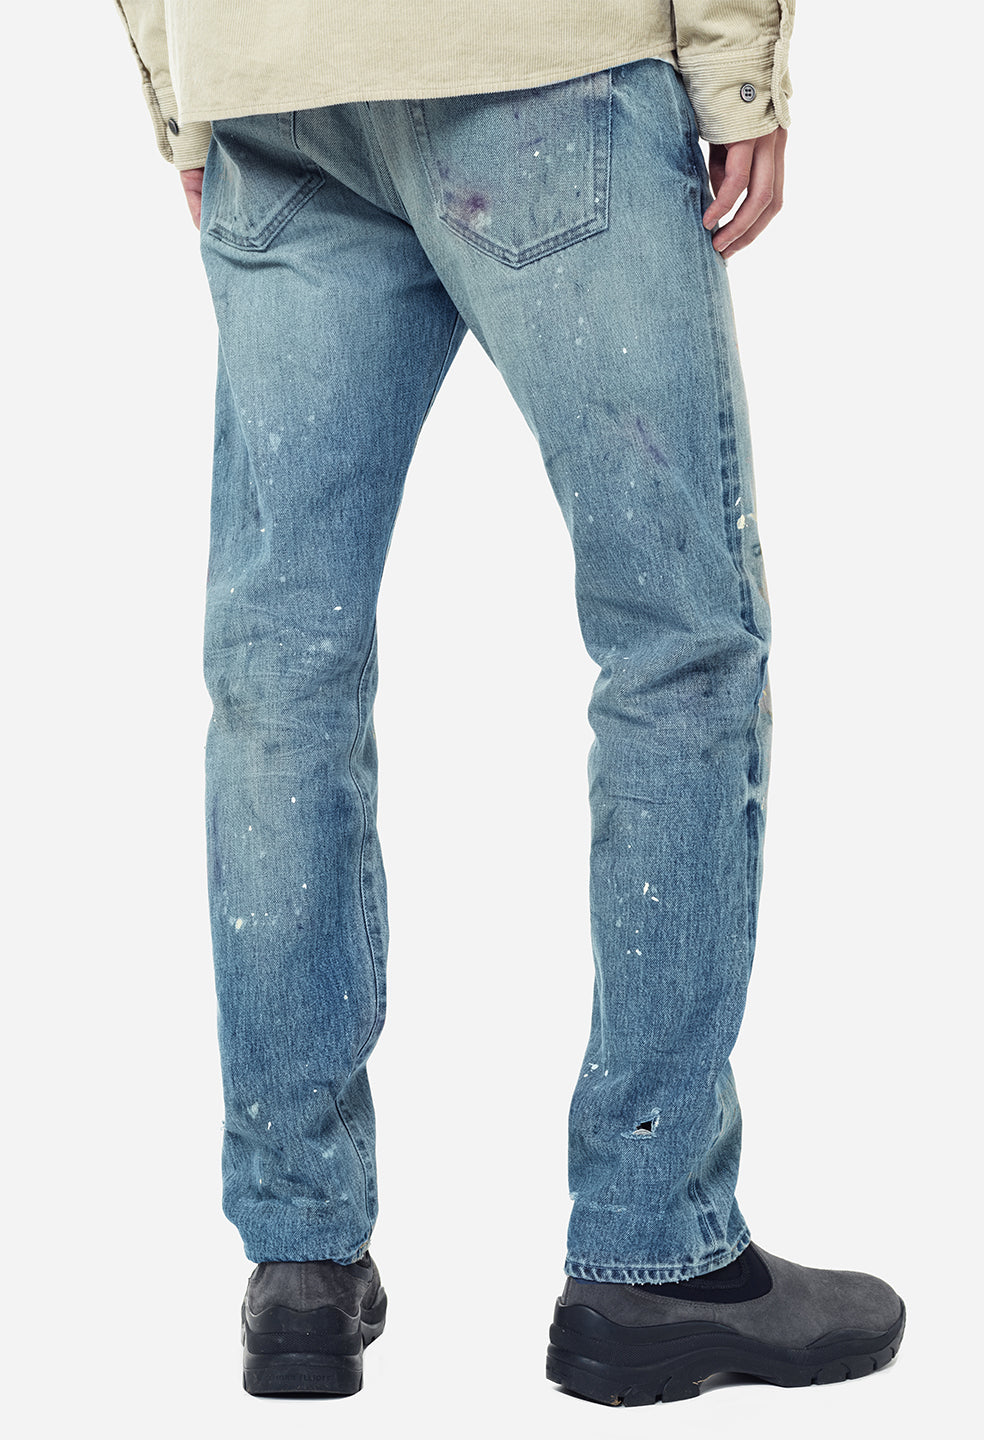 ANGI THE POCKET JEANS IN SNOW WASHED – KURE